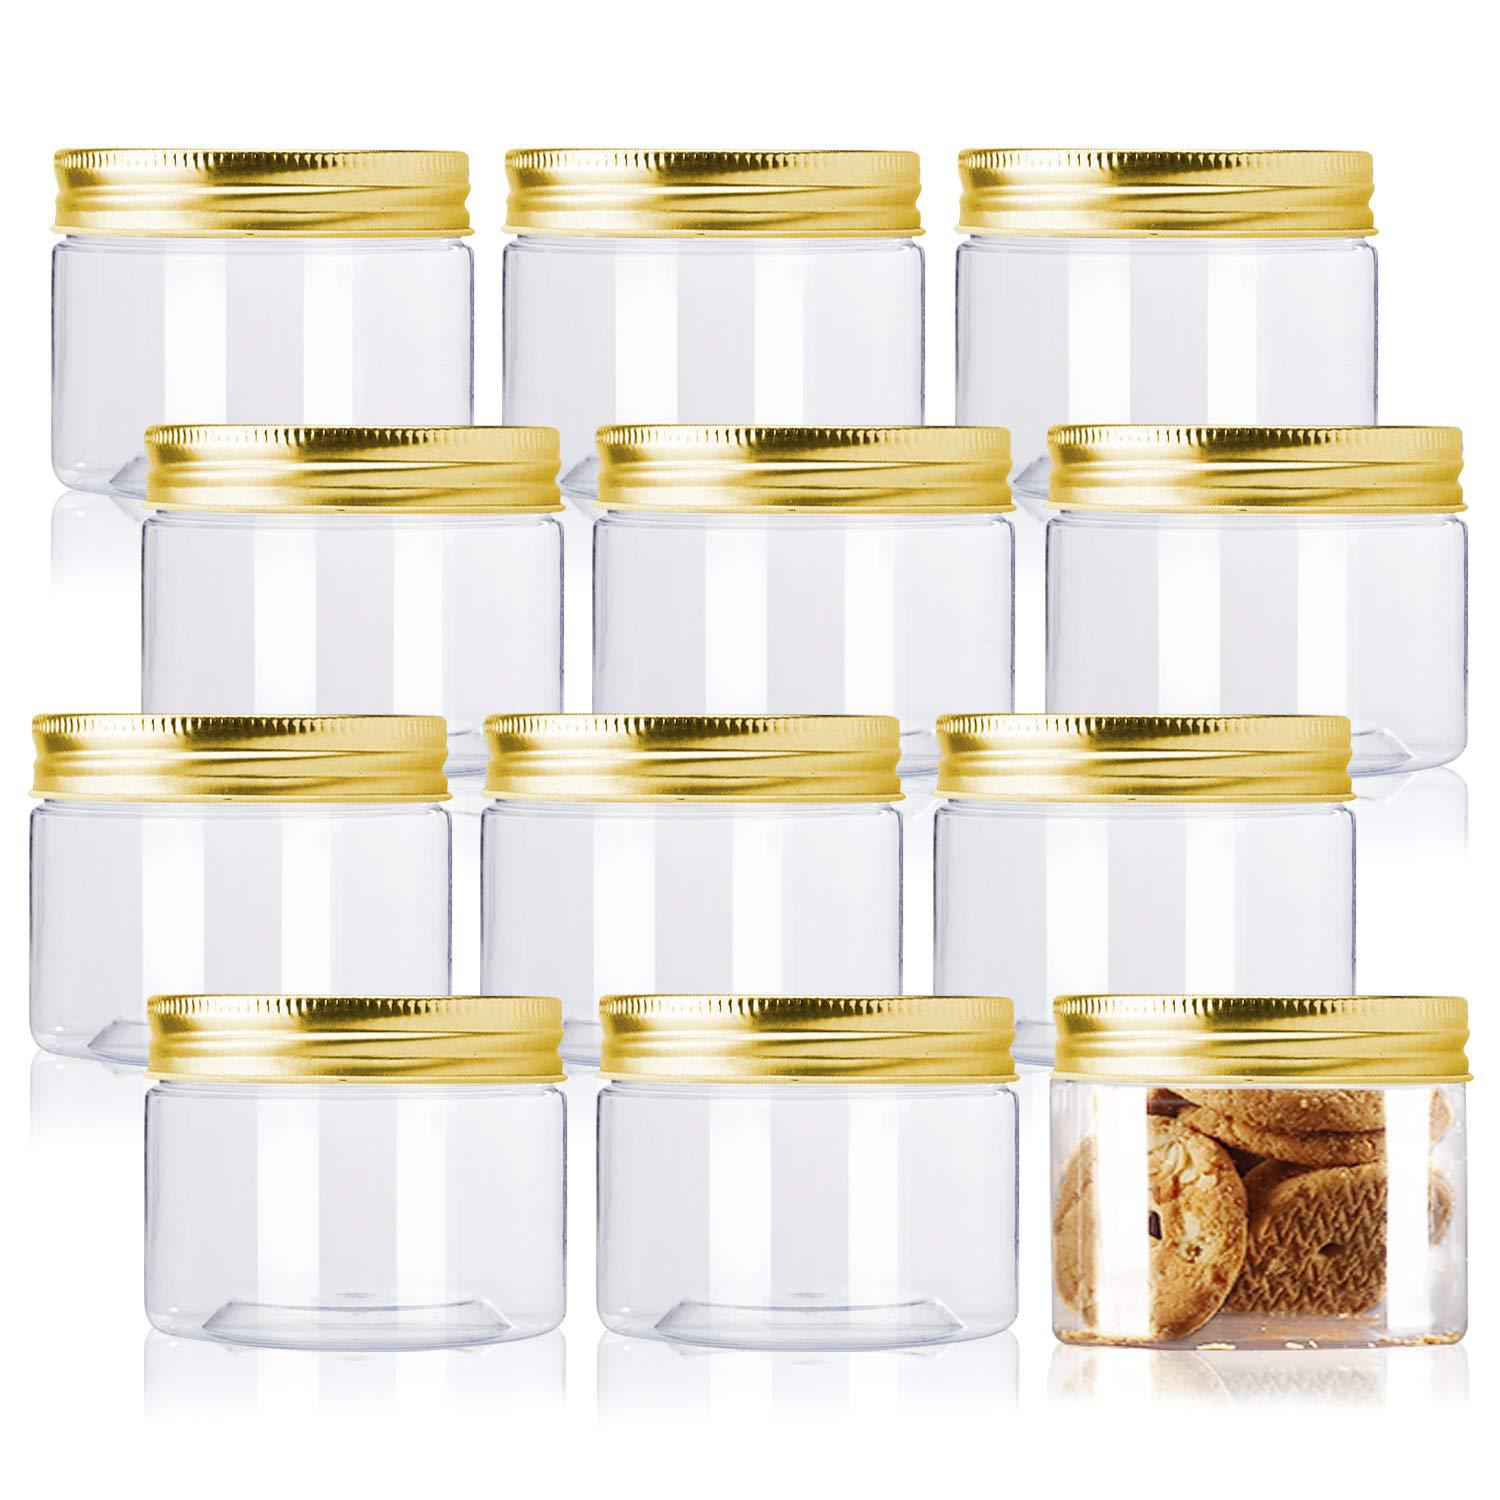 Rocutus plastic jars with lids,12 pack refillable plastic slime storage containers clear plastic food storage jars,plastic containers